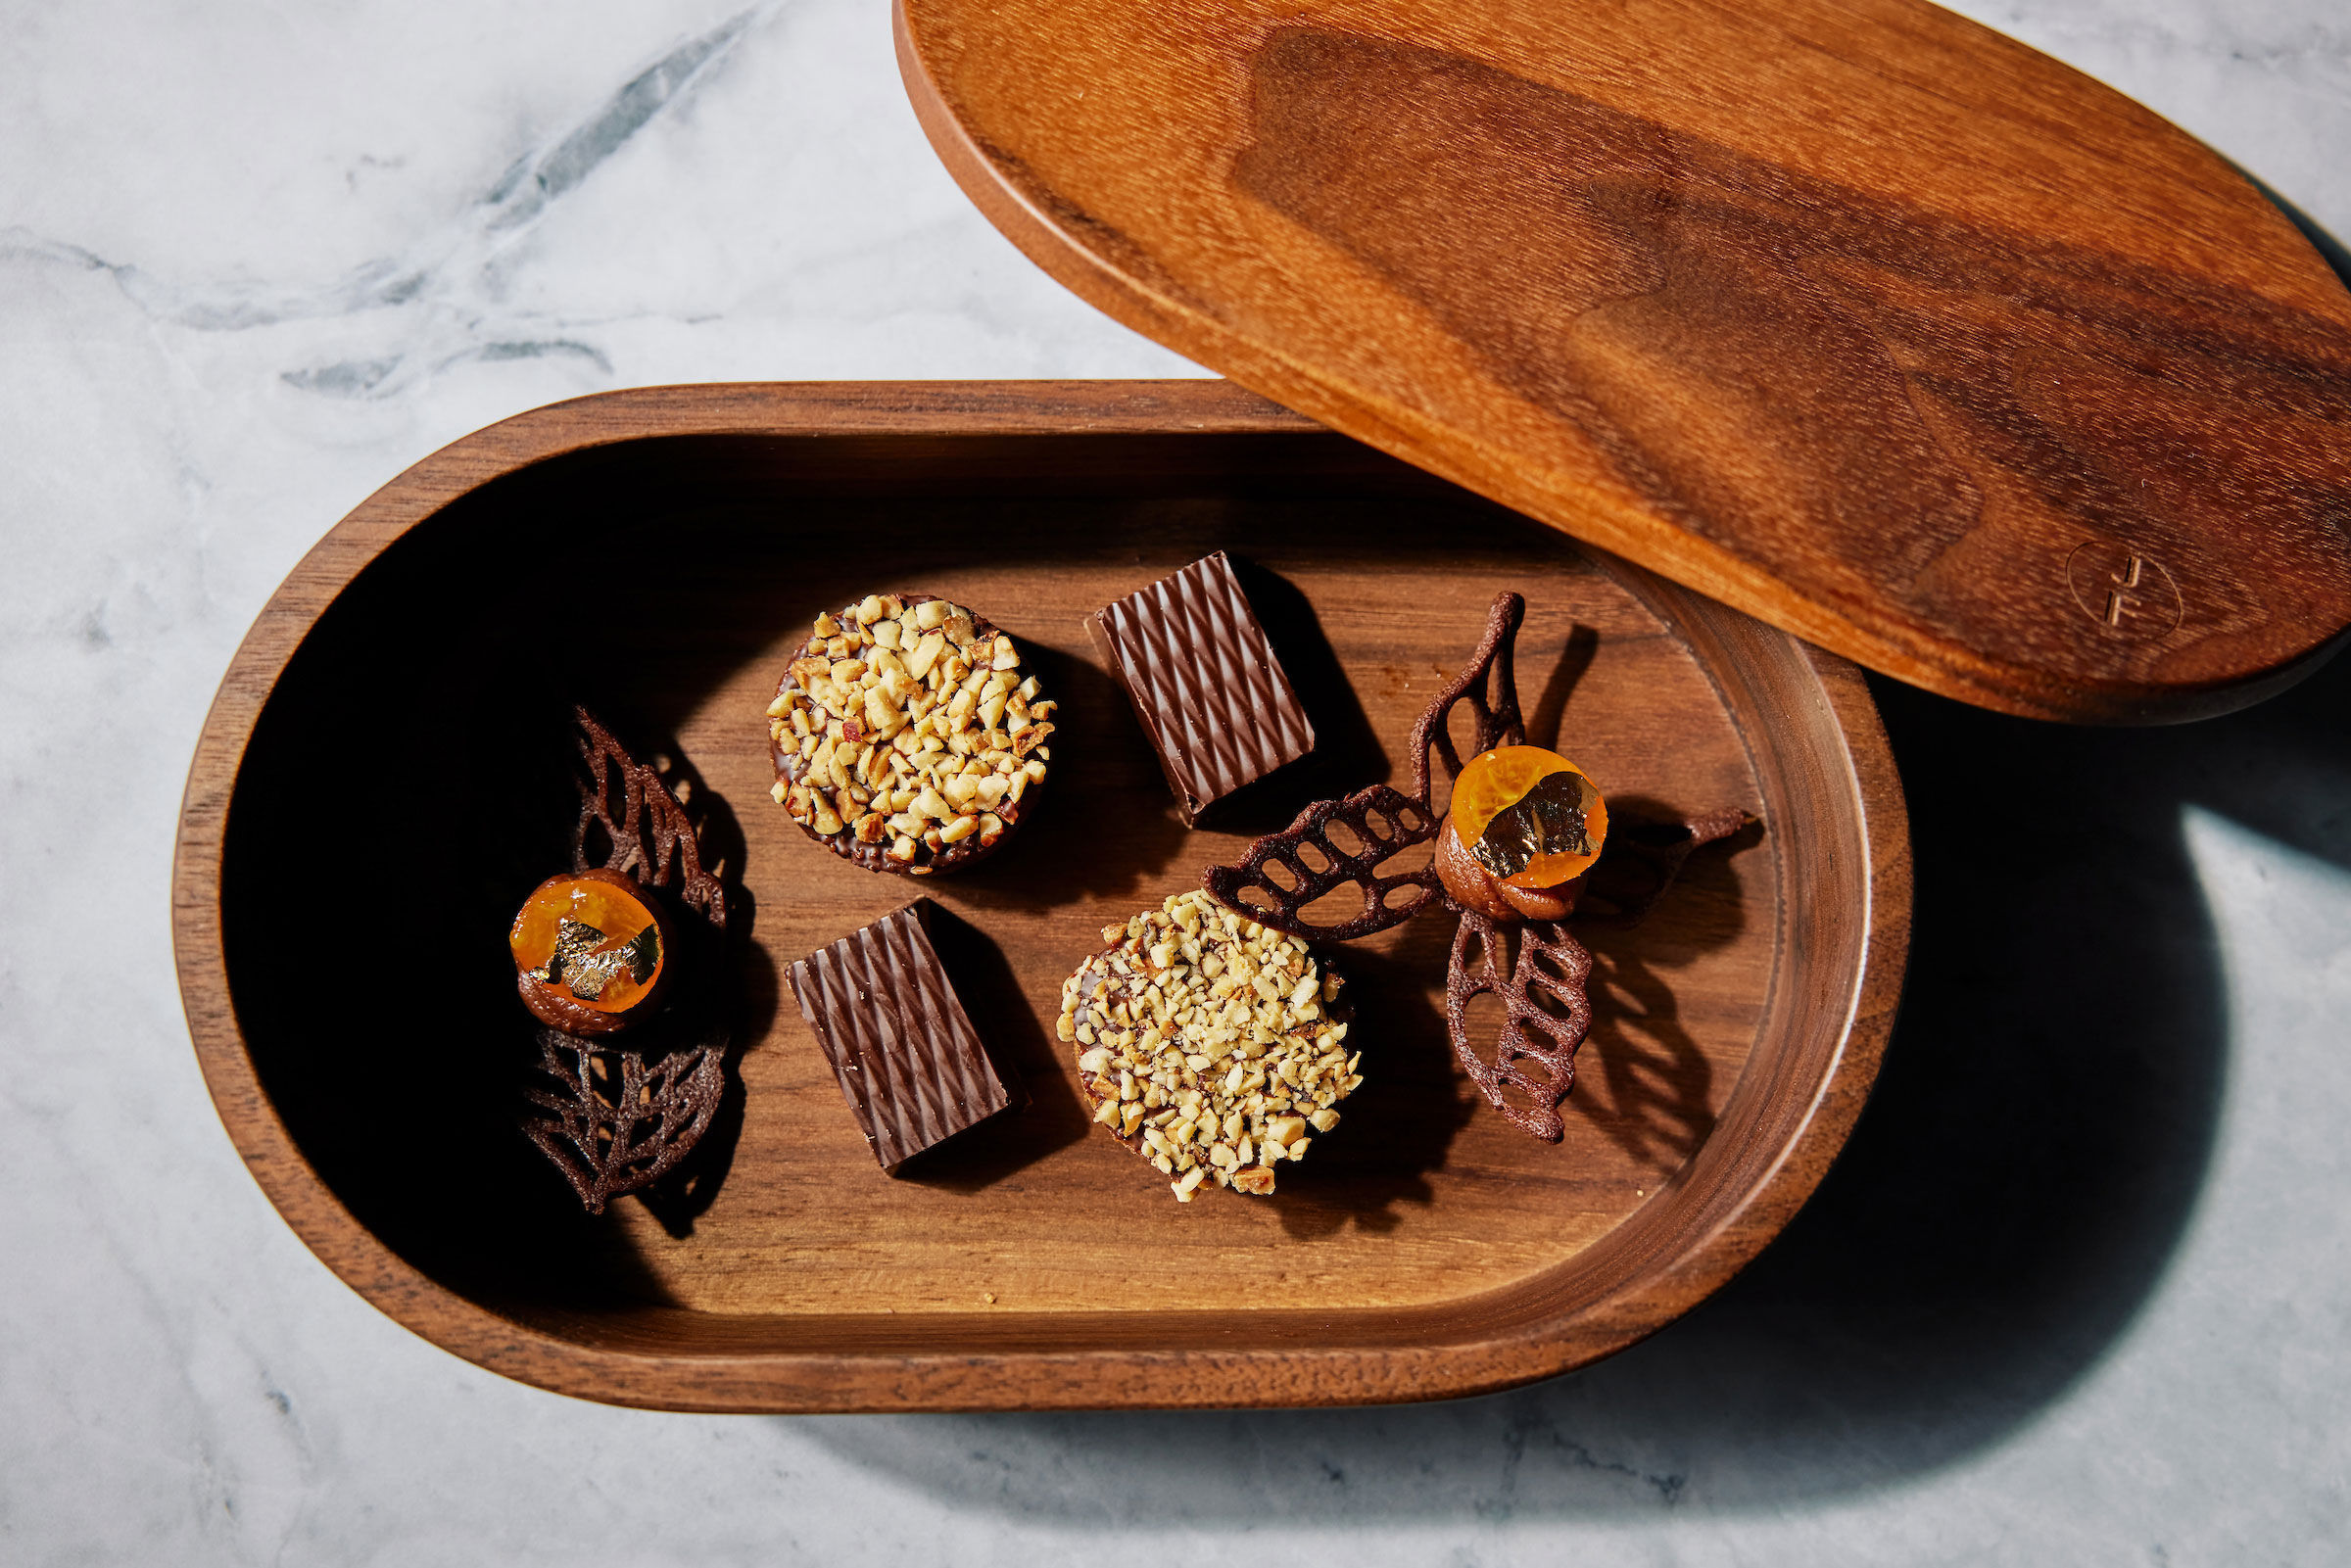 wooden oval box containing decorative chocolates and mignardises for dessert